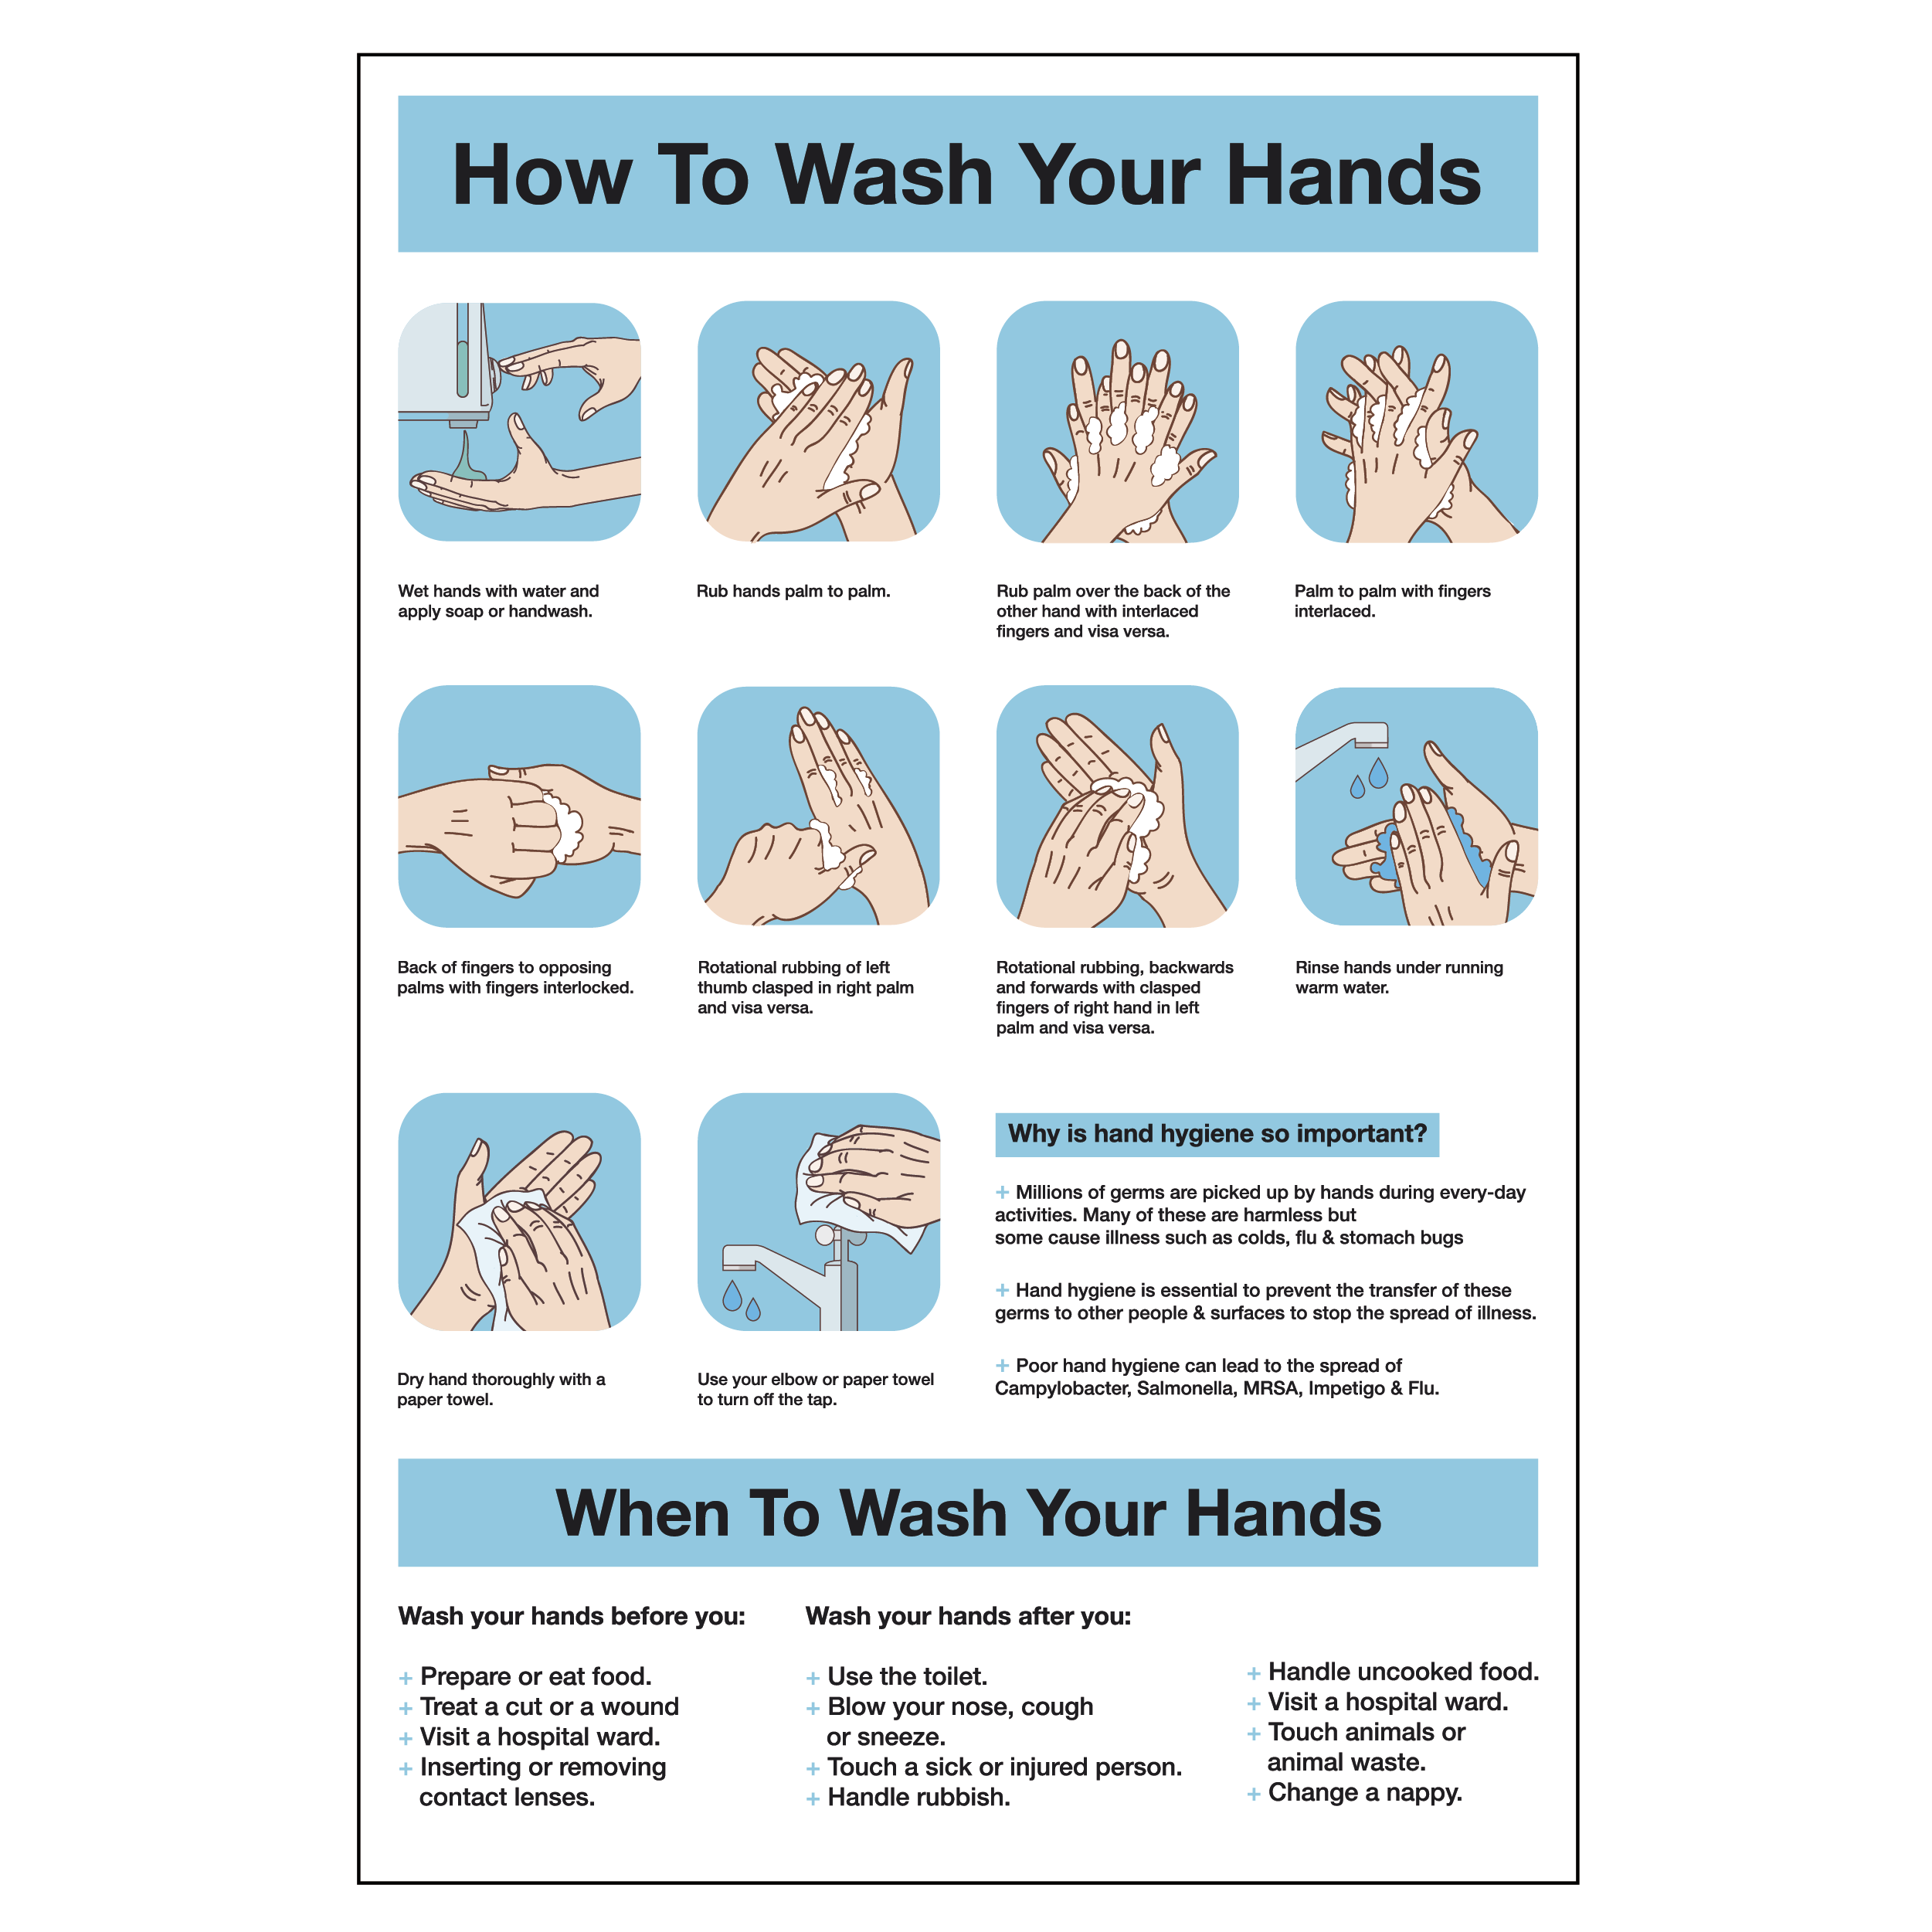 Steps On How To Wash Hands Poster Catersigns